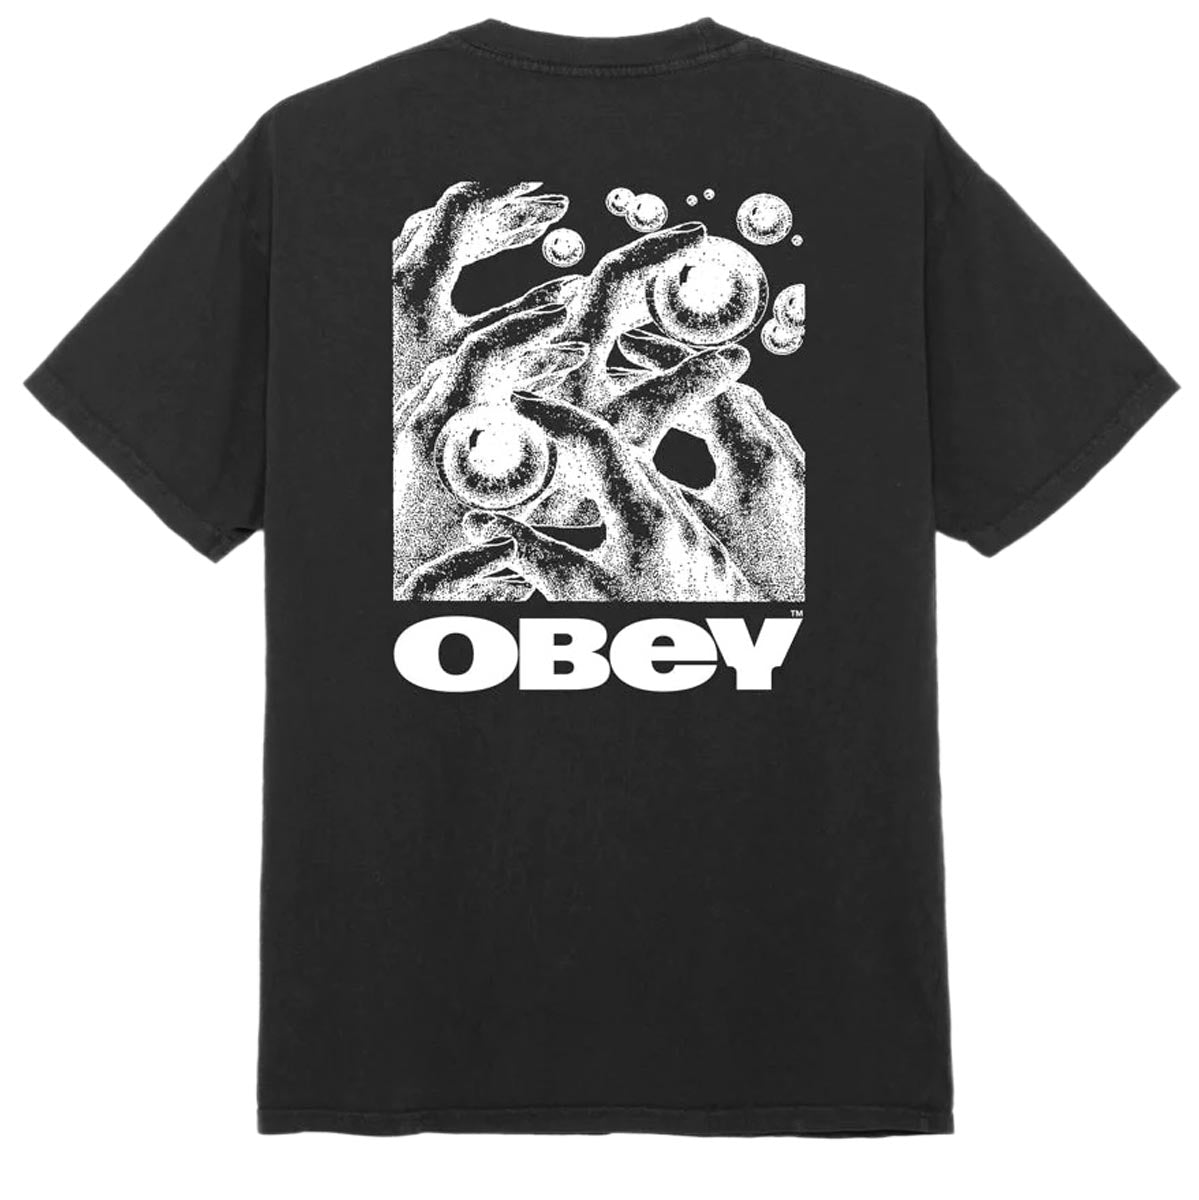 Obey Eyes In My Head T-Shirt - Pigment Vintage Black image 1